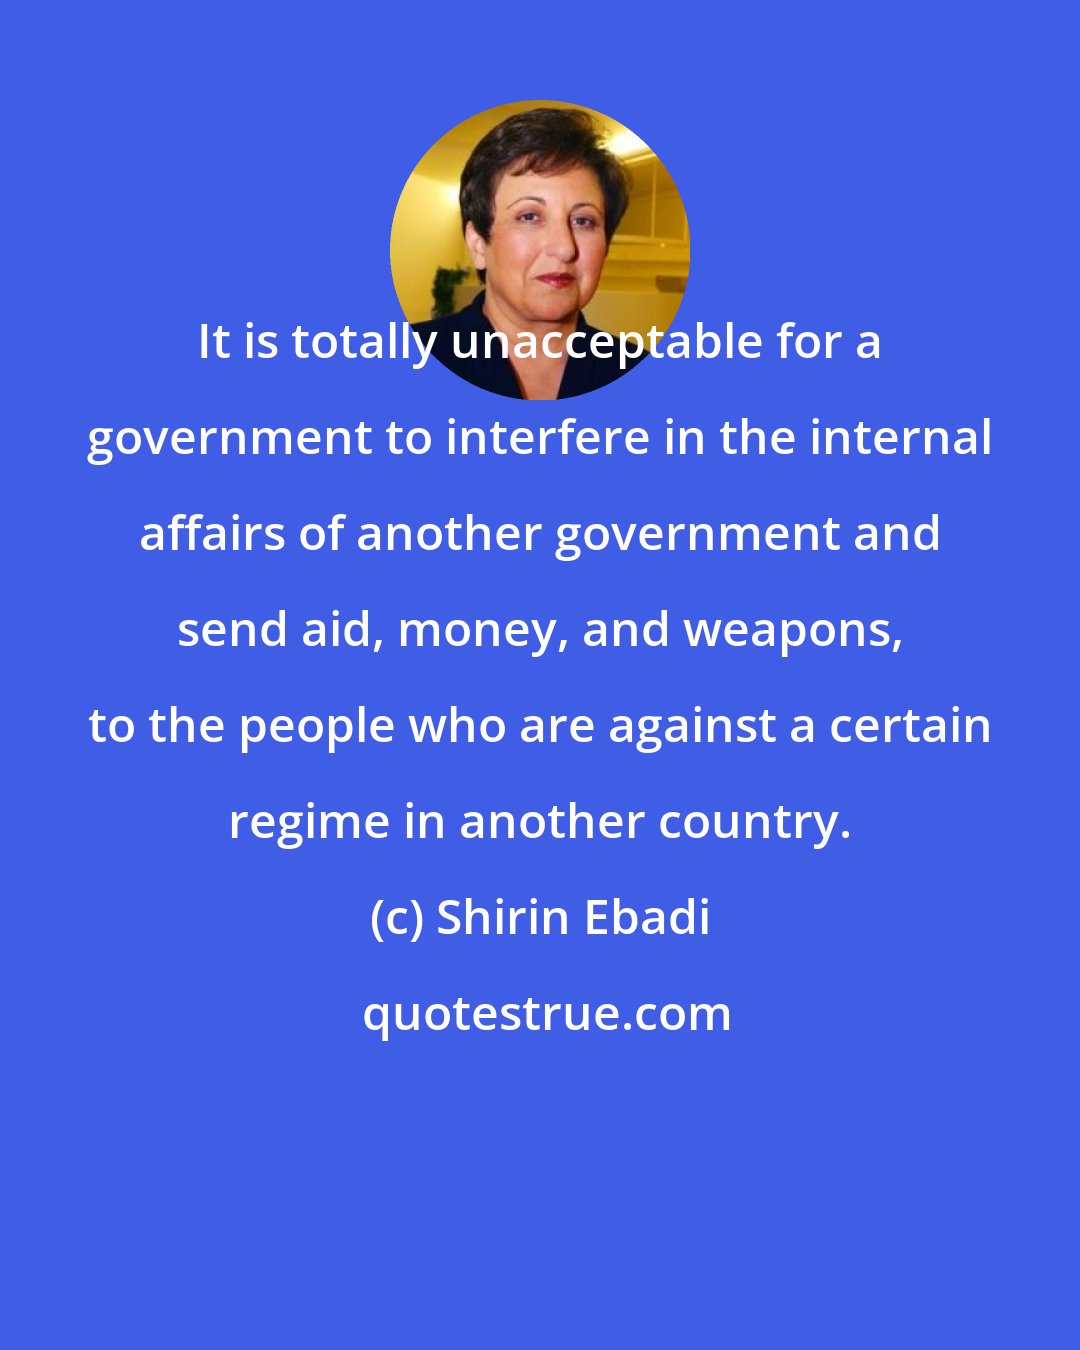 Shirin Ebadi: It is totally unacceptable for a government to interfere in the internal affairs of another government and send aid, money, and weapons, to the people who are against a certain regime in another country.